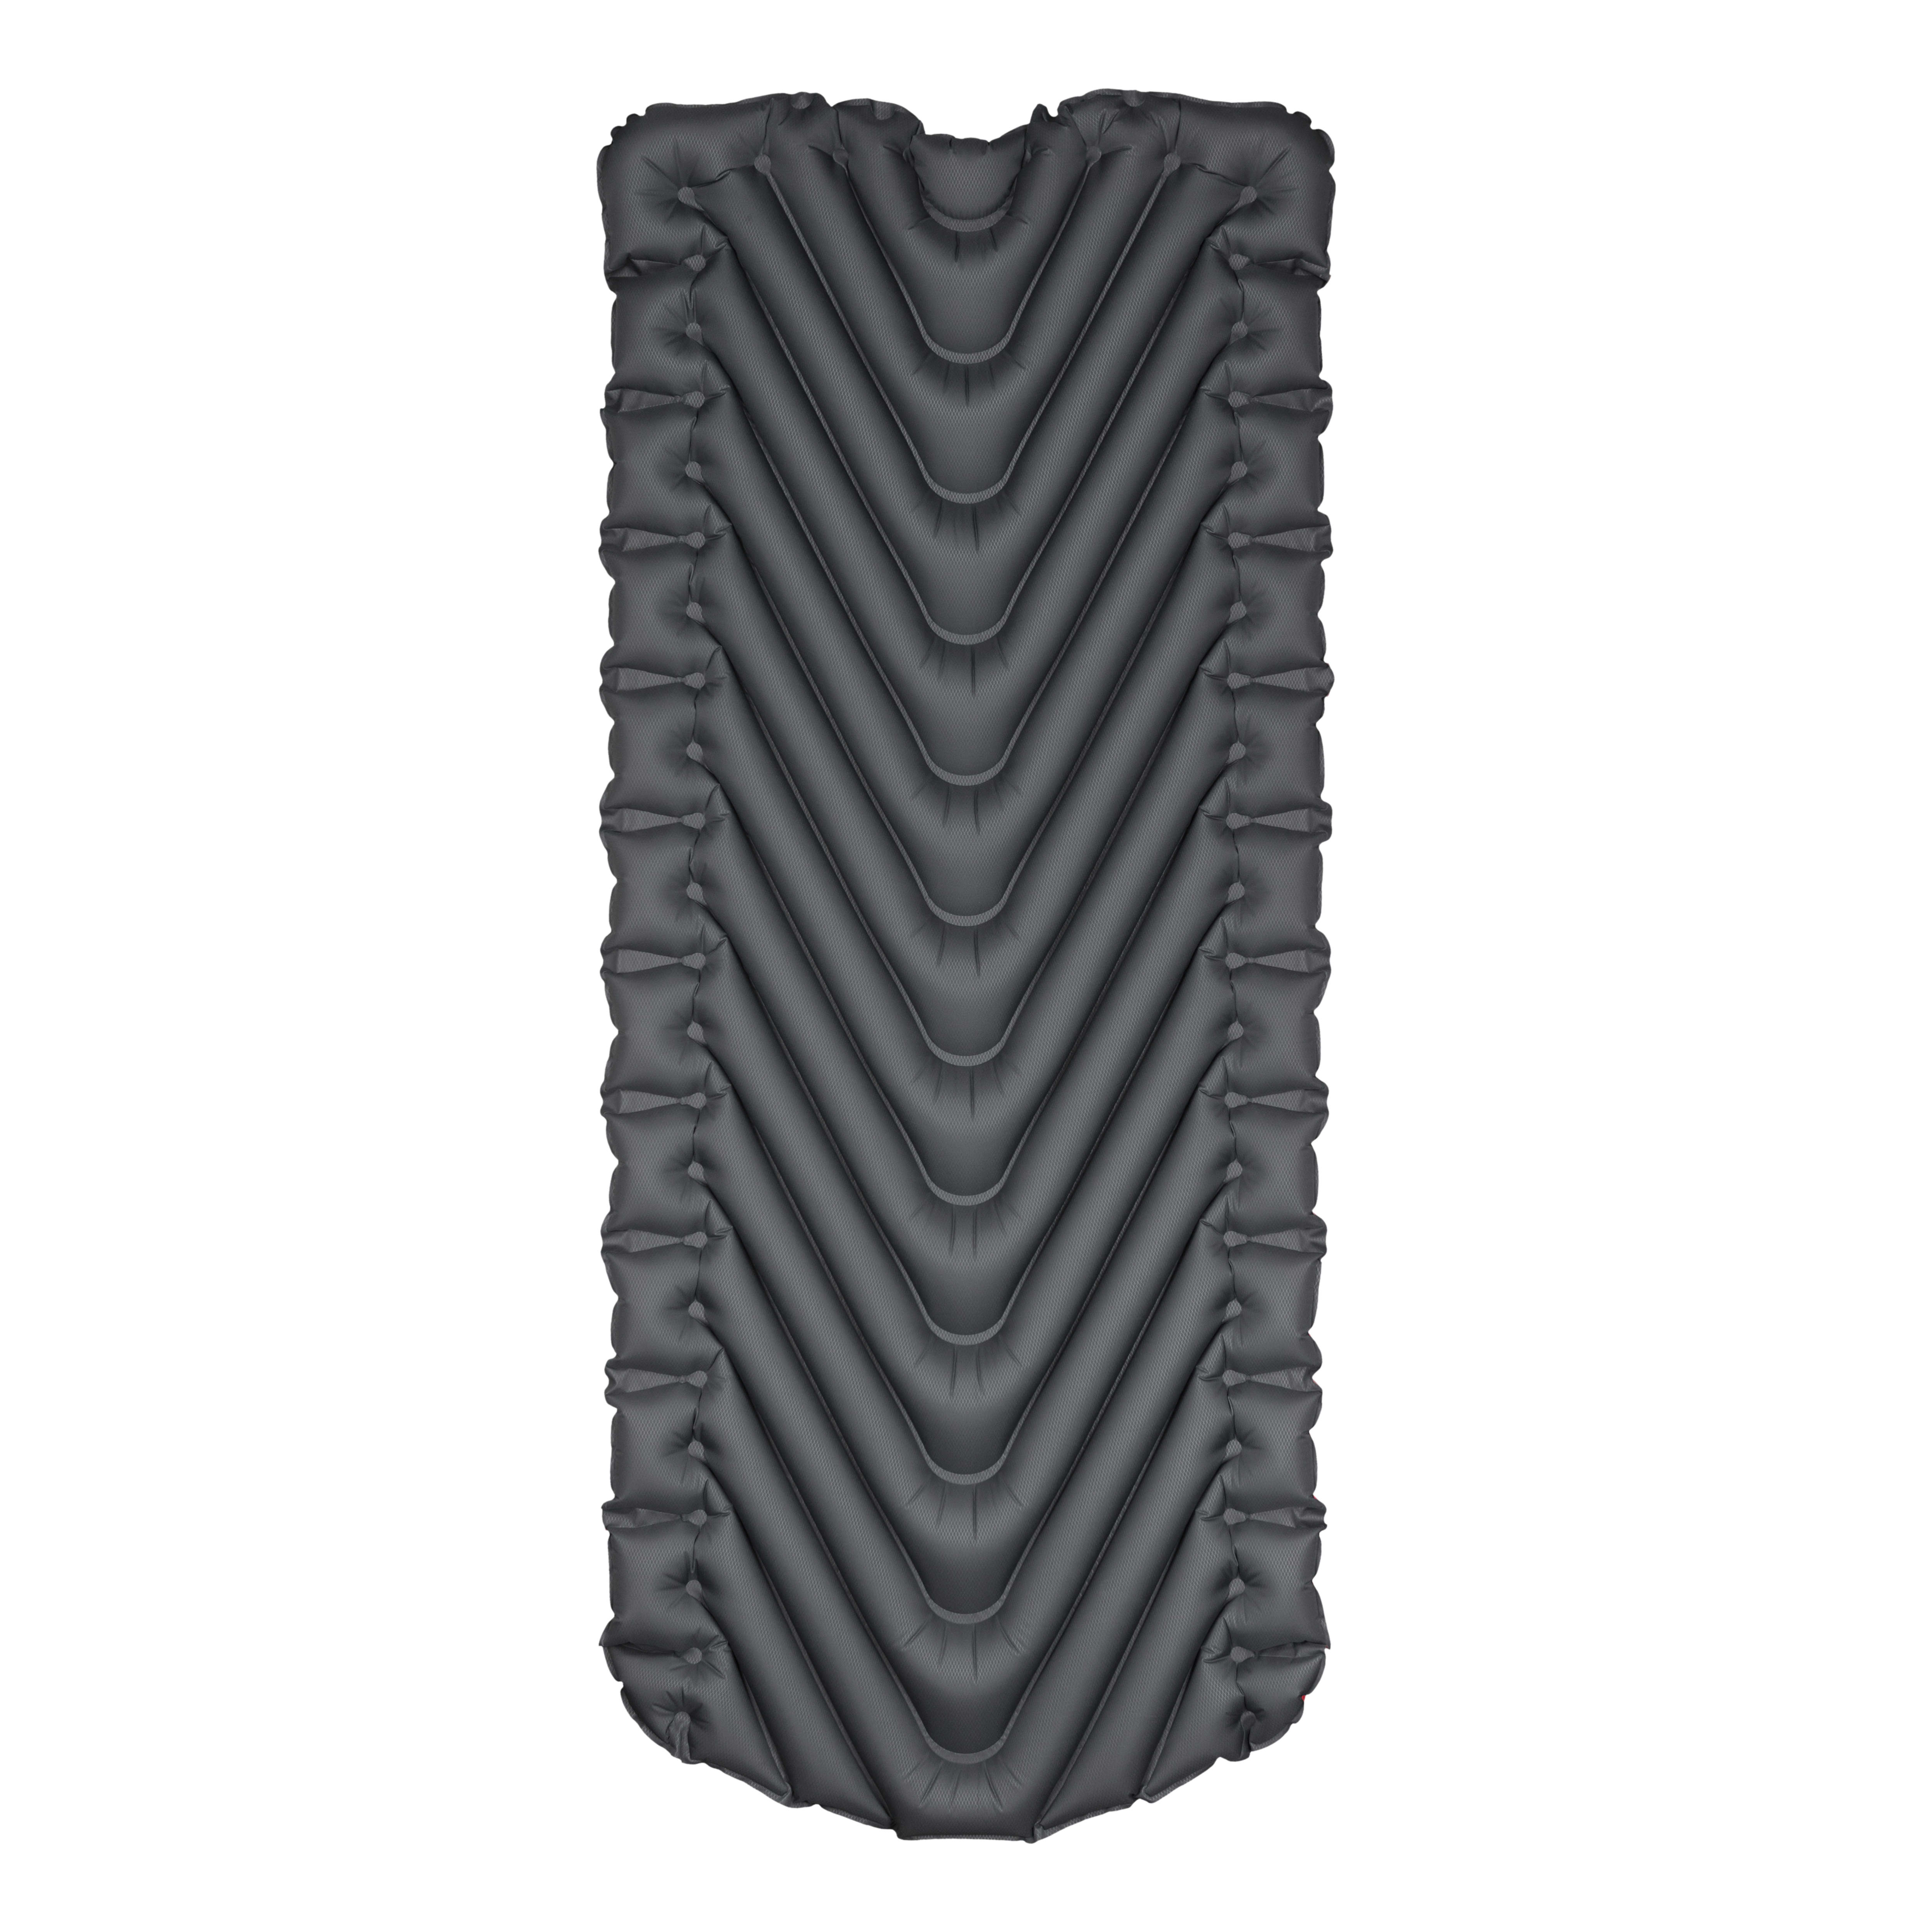 Klymit Insulated Static V Luxe Sleeping Pad - Bottom View